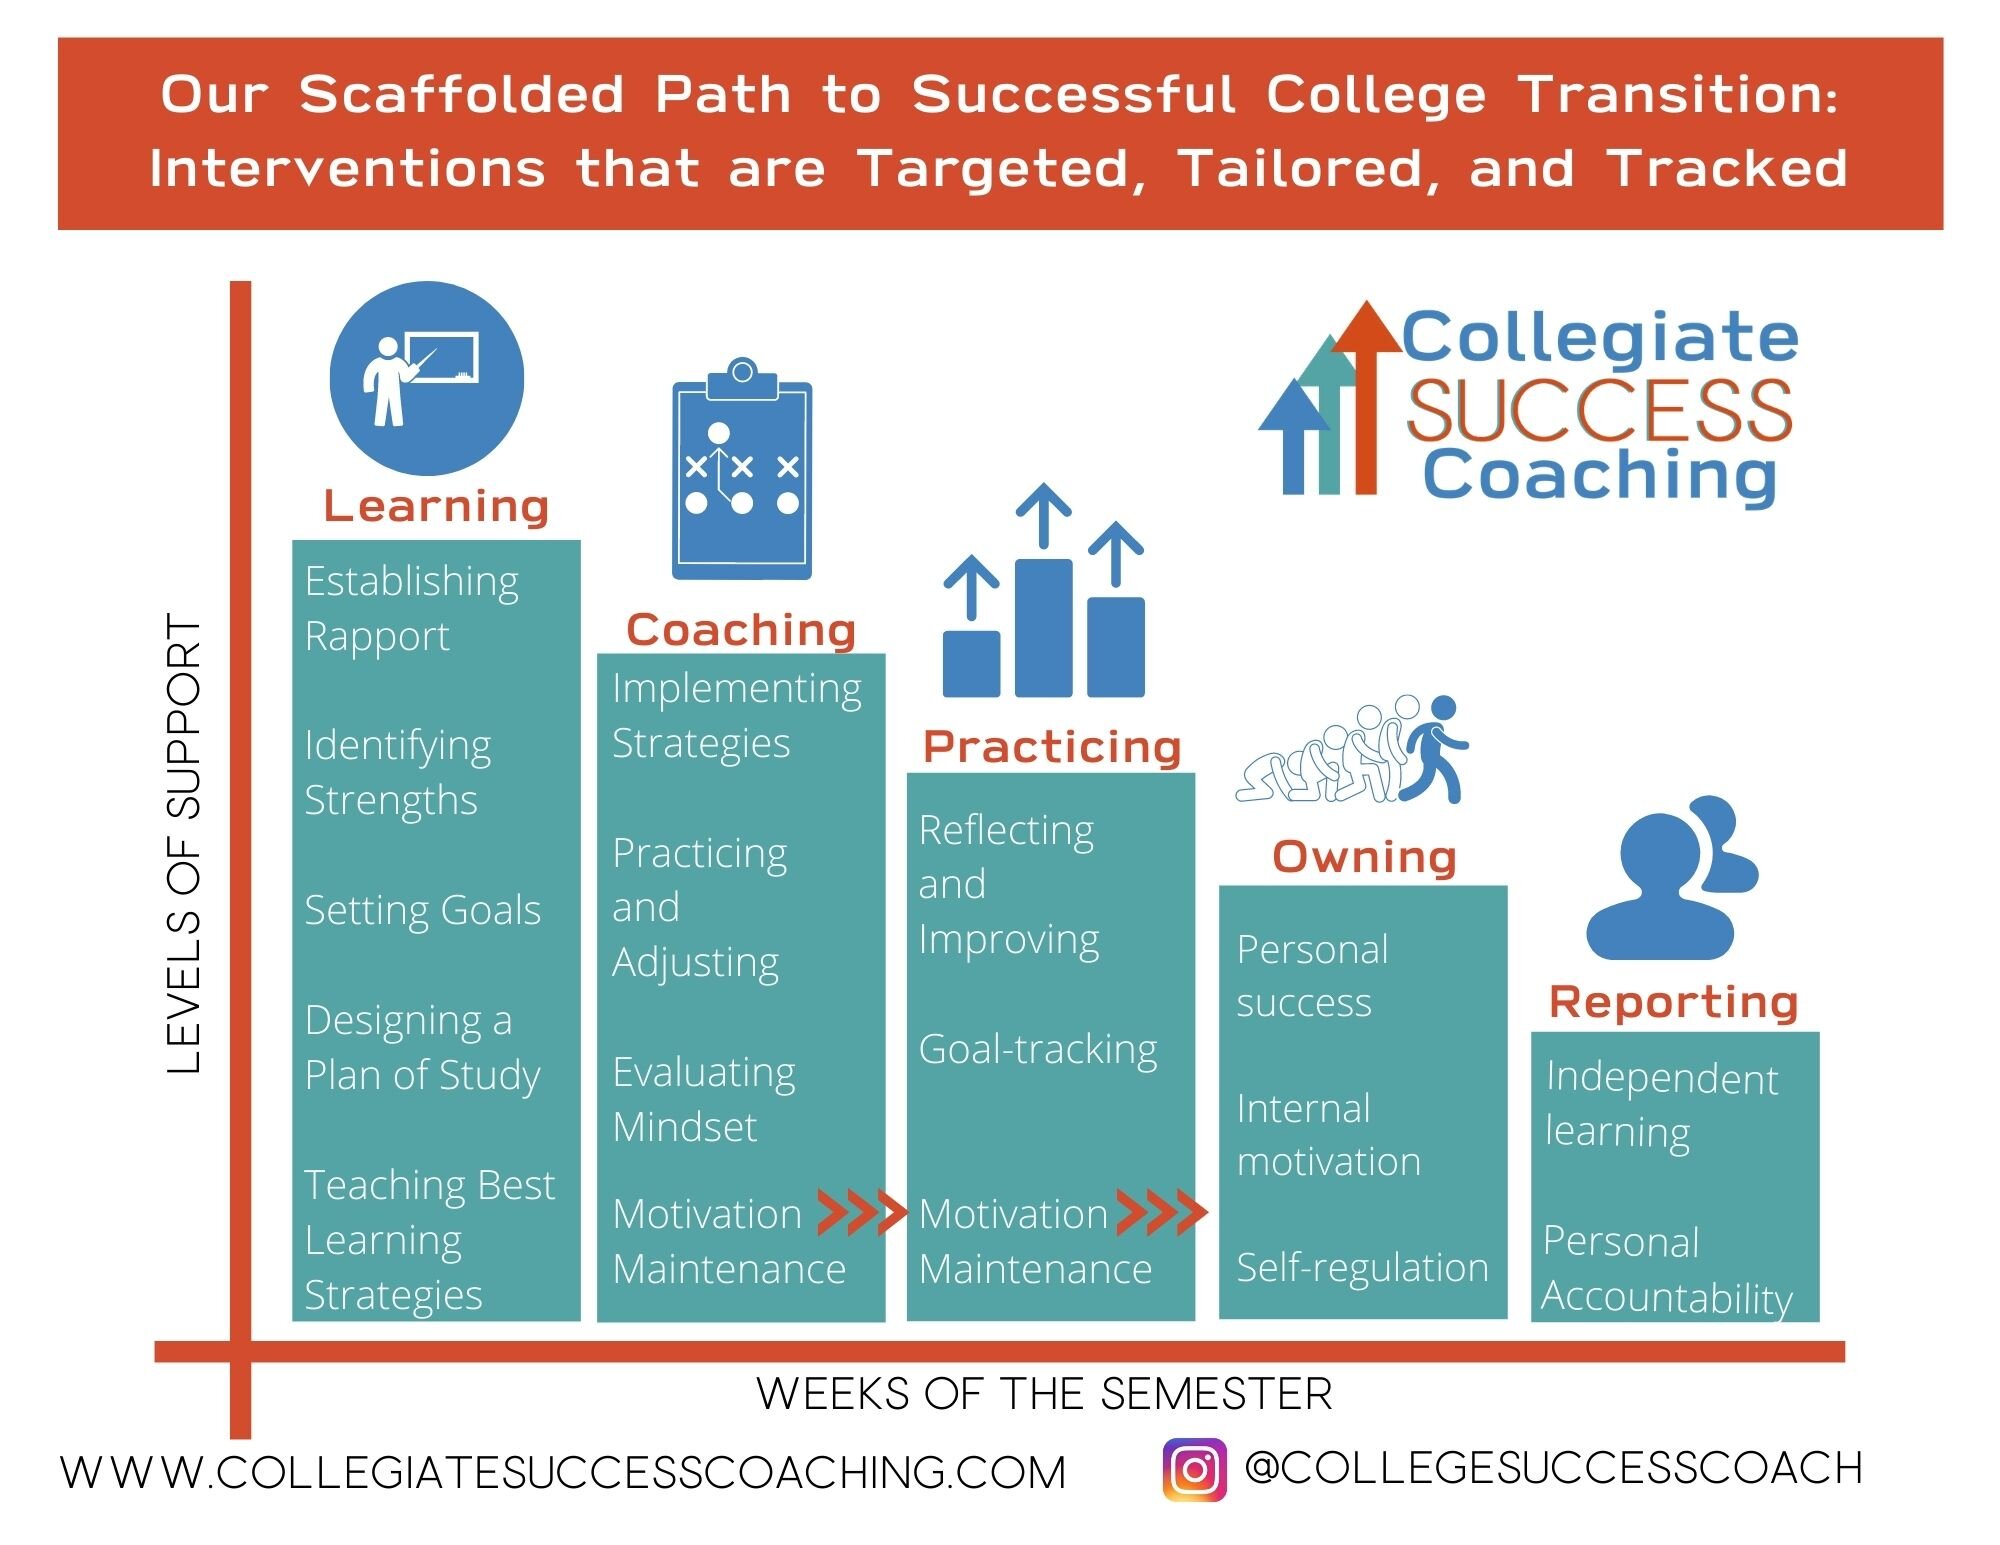 College Career Coaching - The 3 C's of Succcess